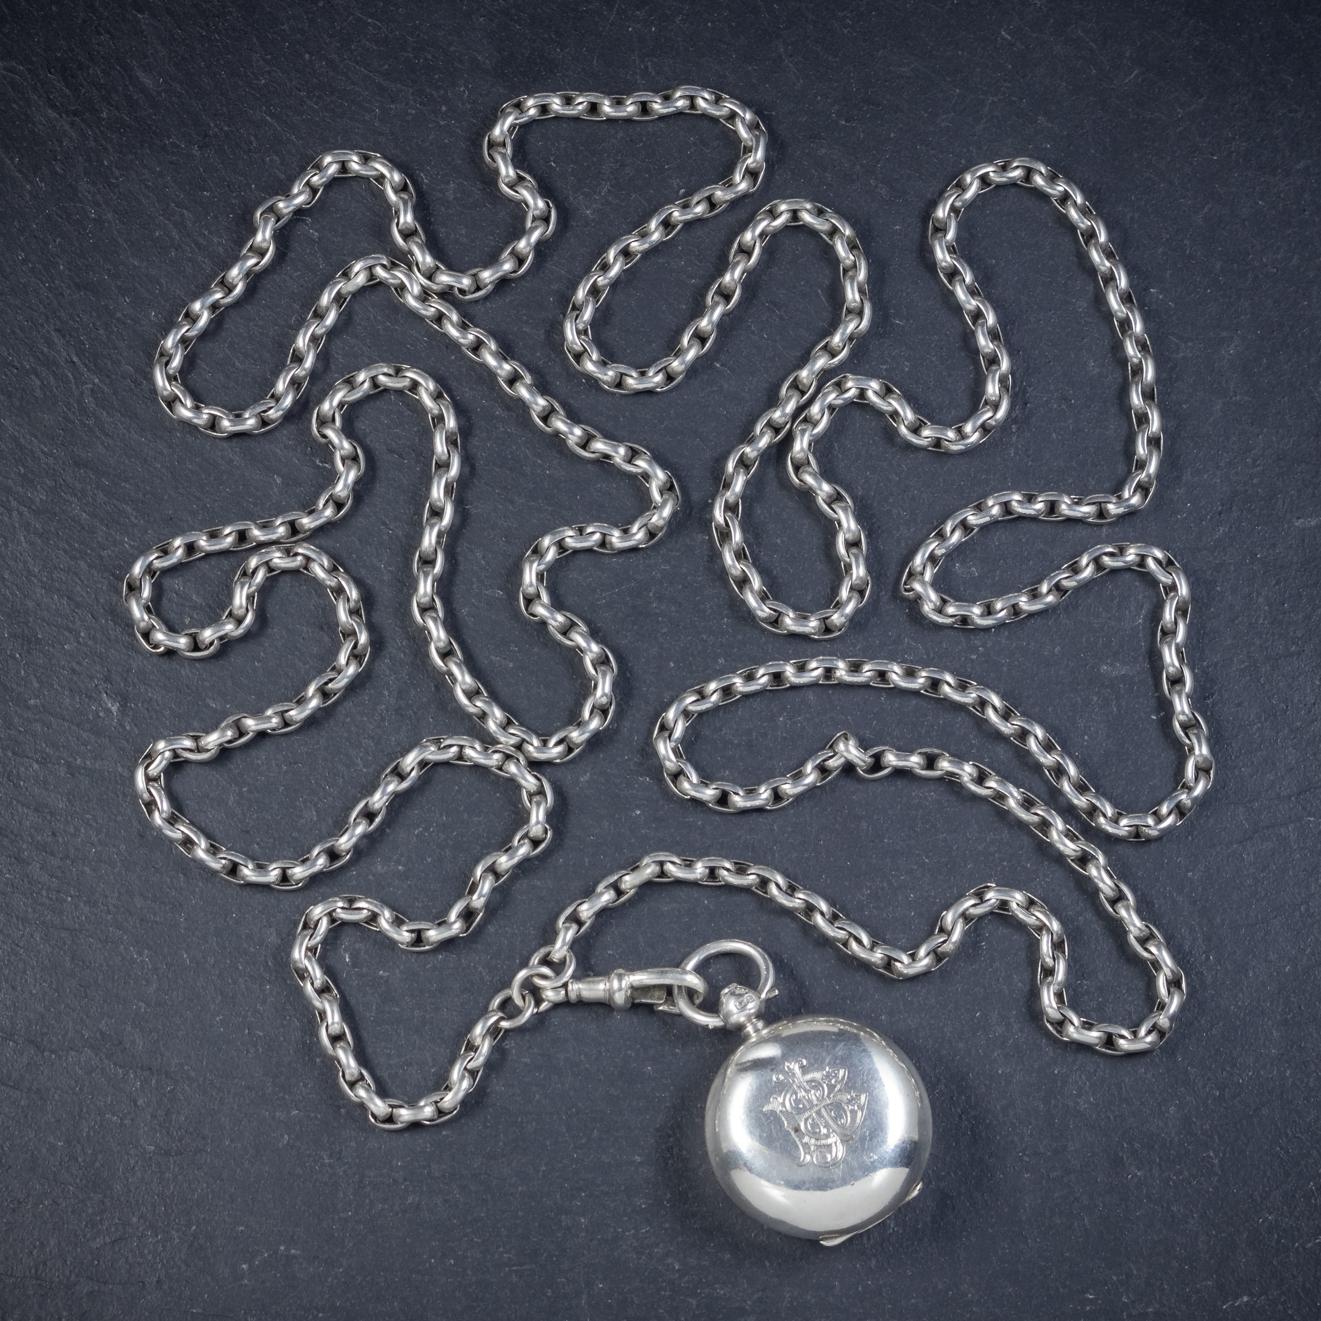 Antique Victorian Sterling Silver Chain Dated 1907 Sovereign Locket Necklace 4